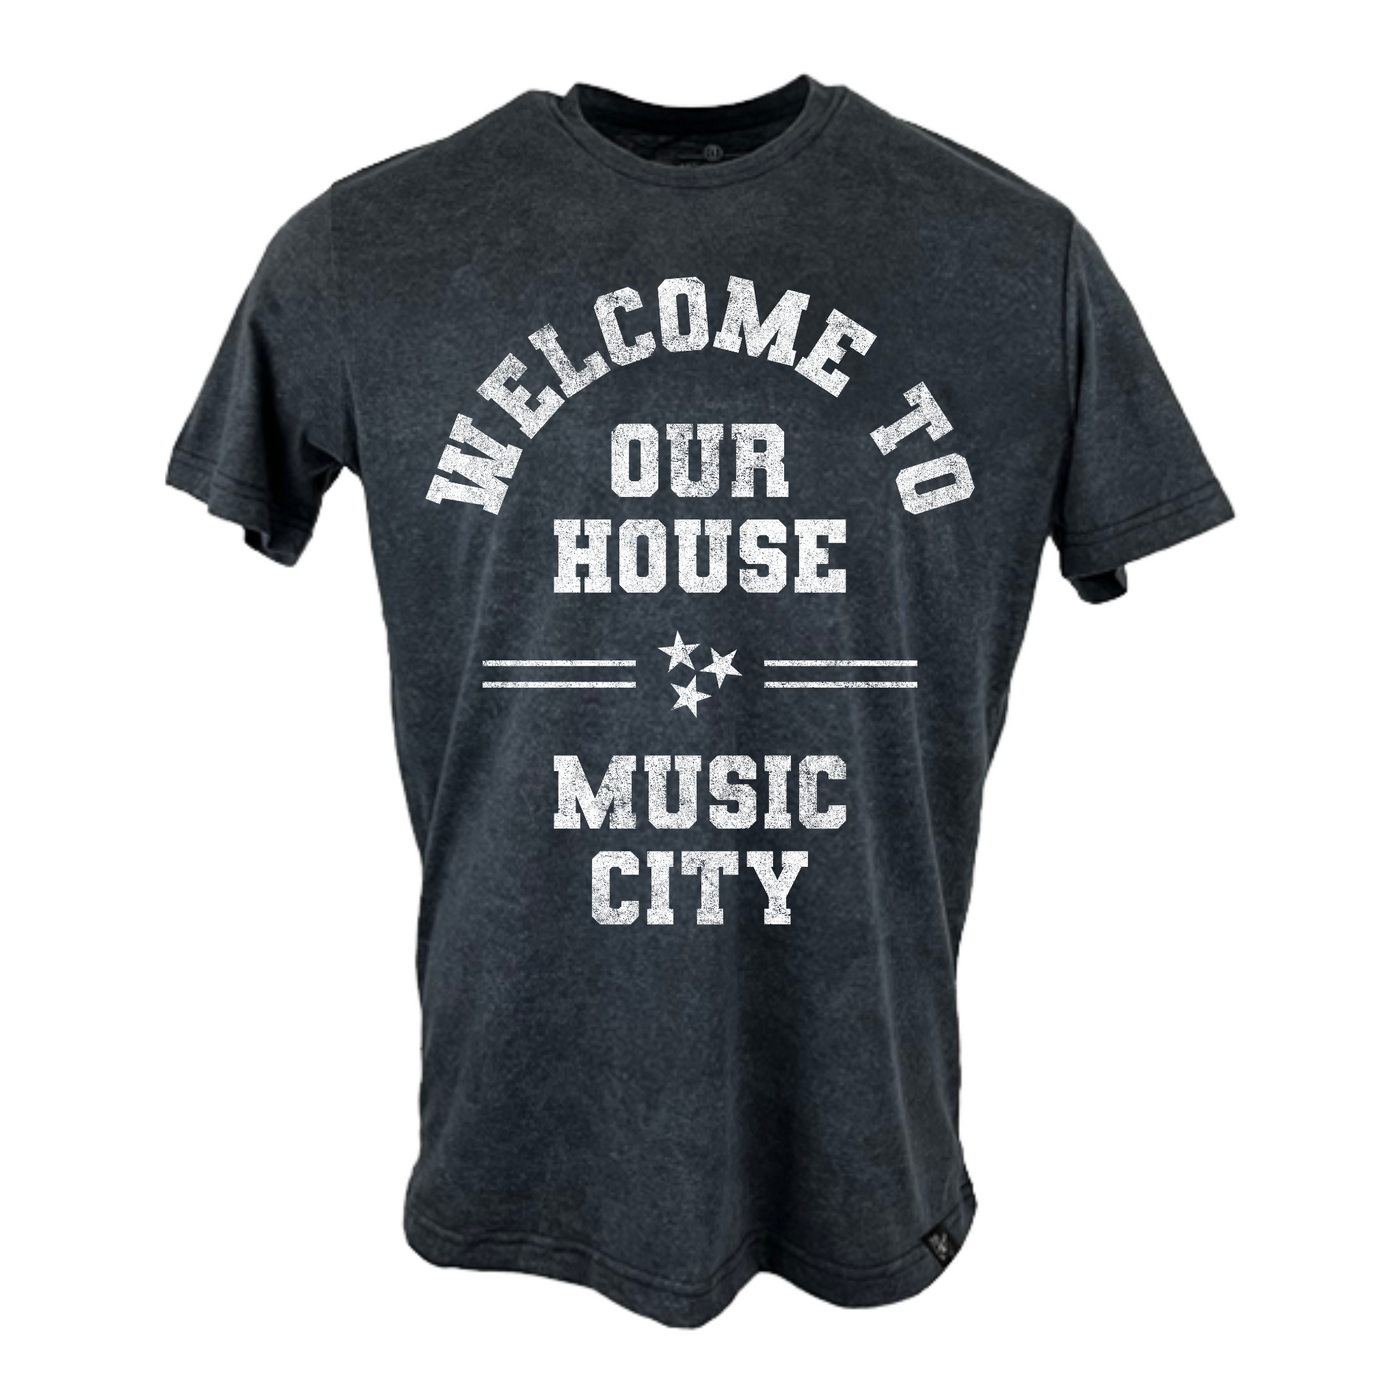 THE 615 HOUSE - Welcome To Our House T-Shirt: Vintage Black